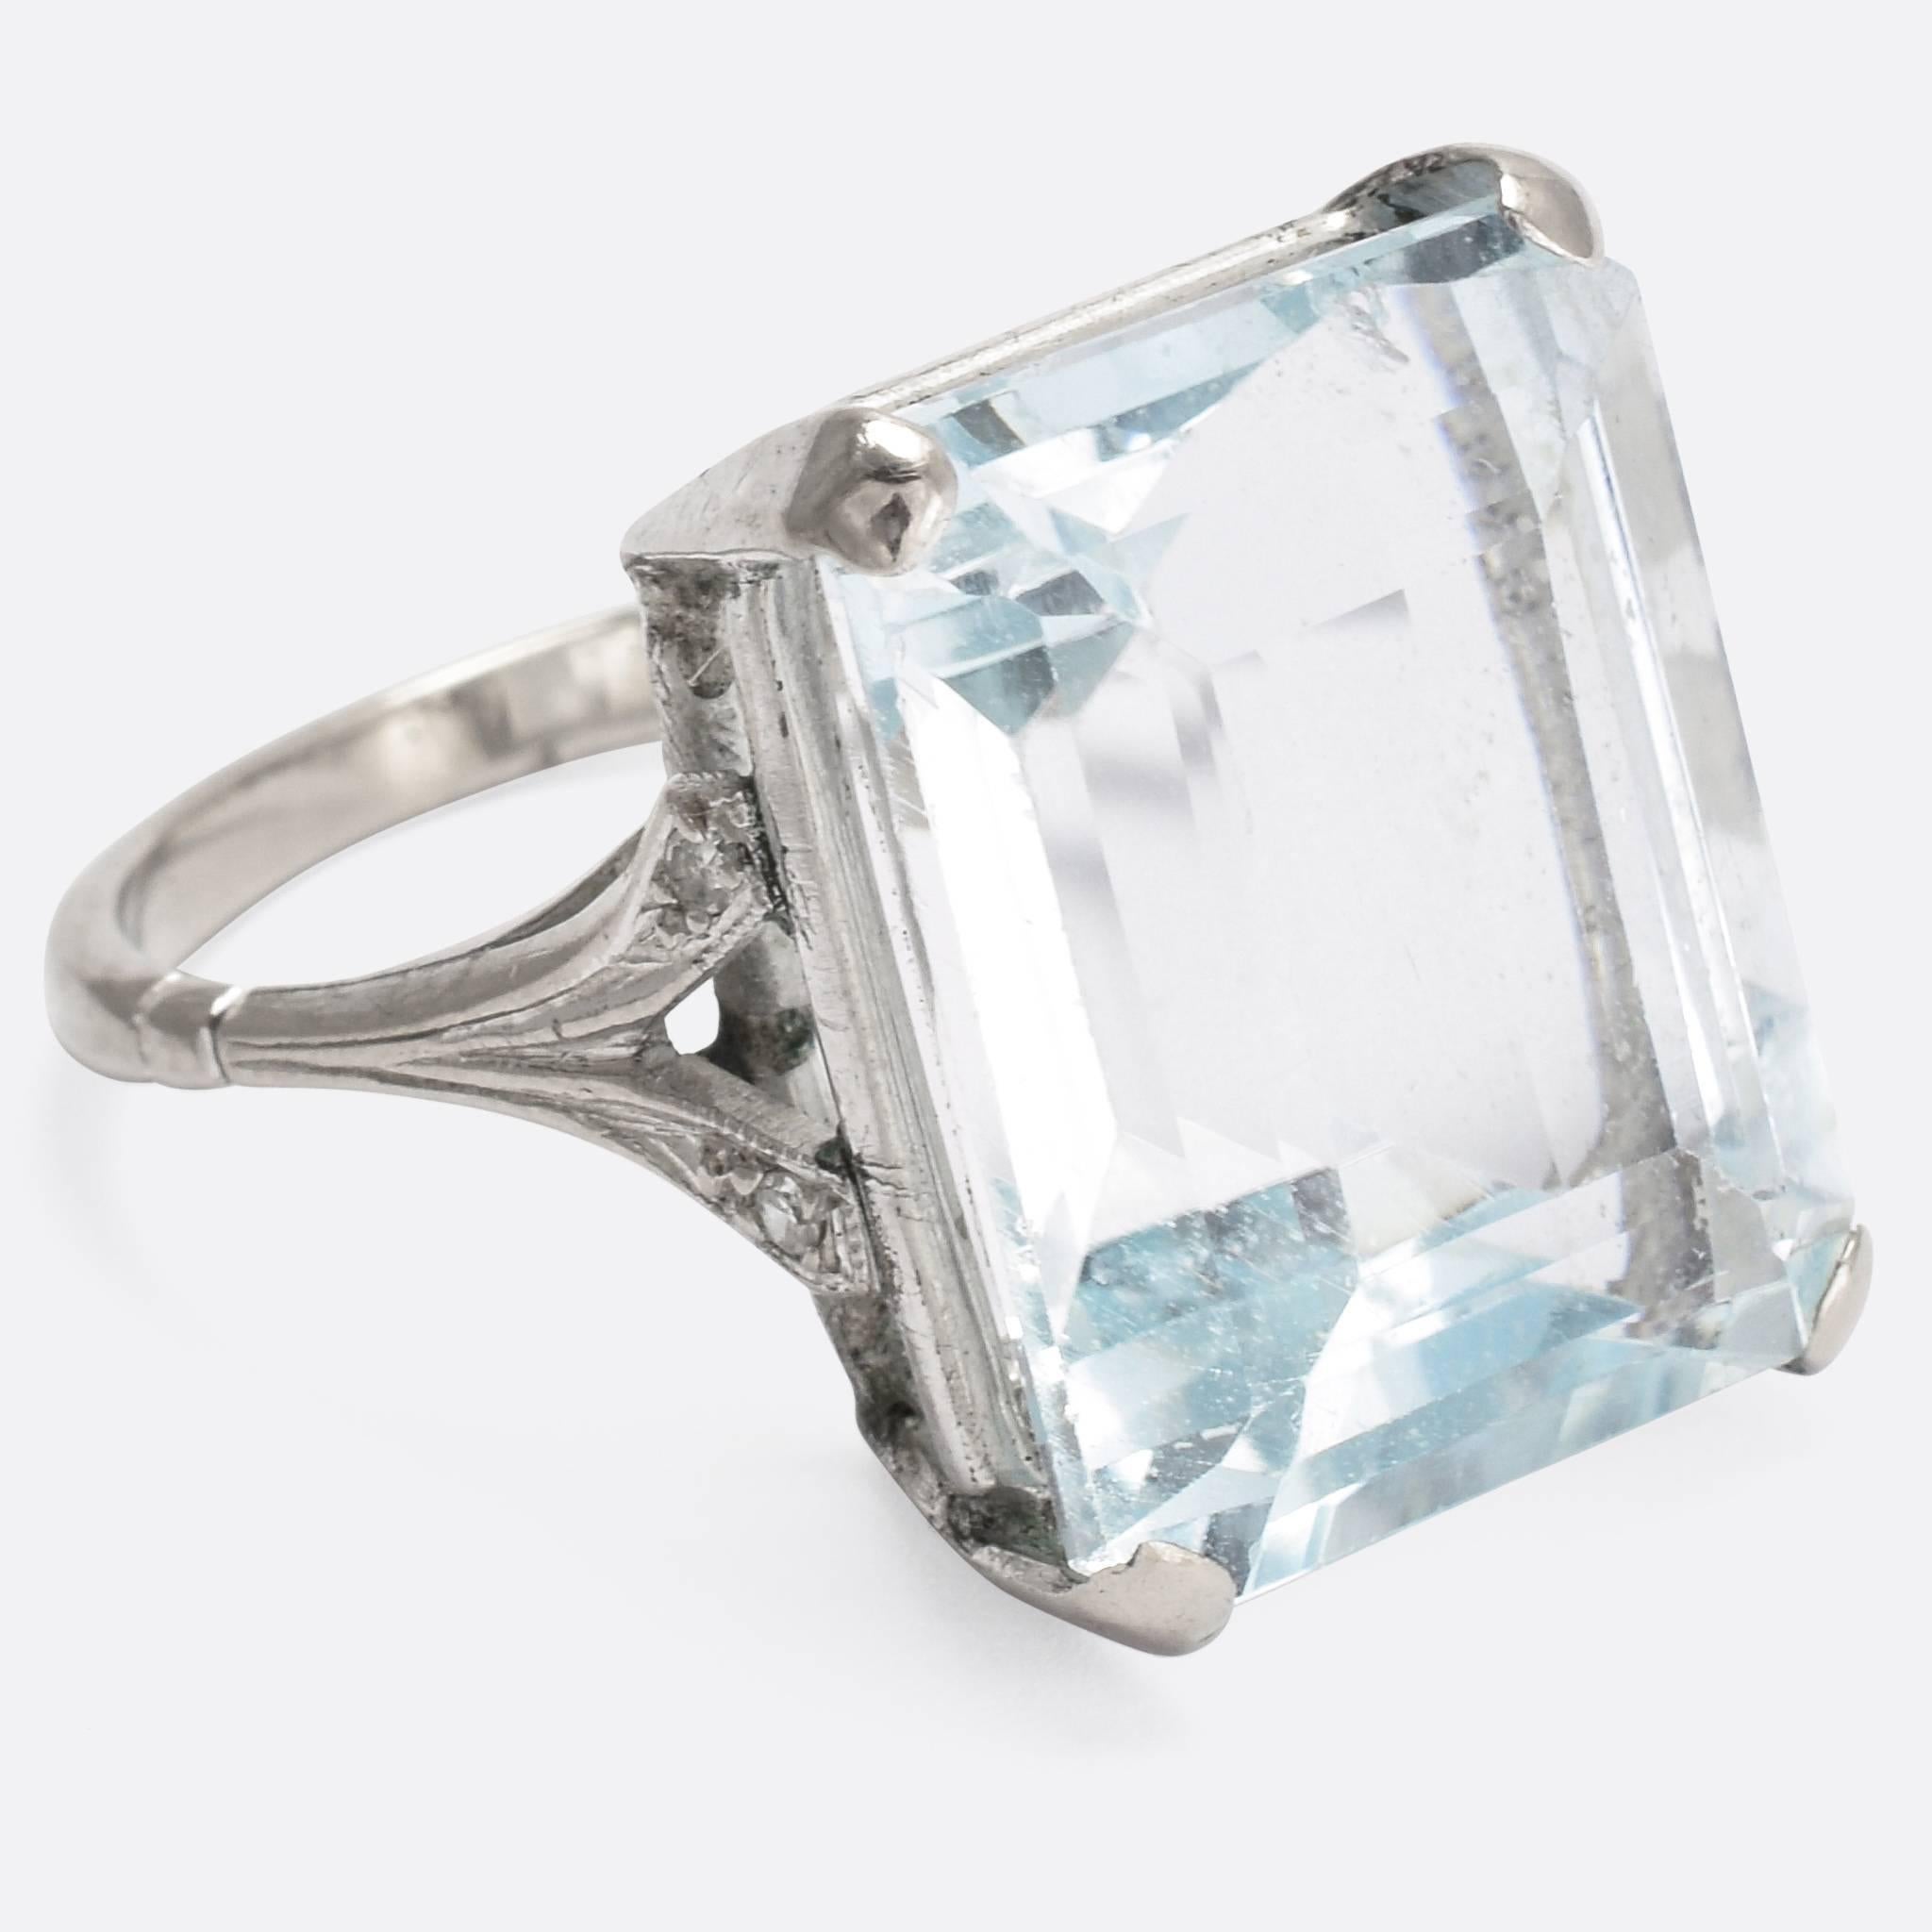 A big and bold 1920s cocktail ring. The main event is a 15.3 carat Aquamarine, in a classic four-claw setting, flanked by four single cut Diamonds on elegant split shoulders. The stone shows a great pale blue colour, and excellent fire... An Art